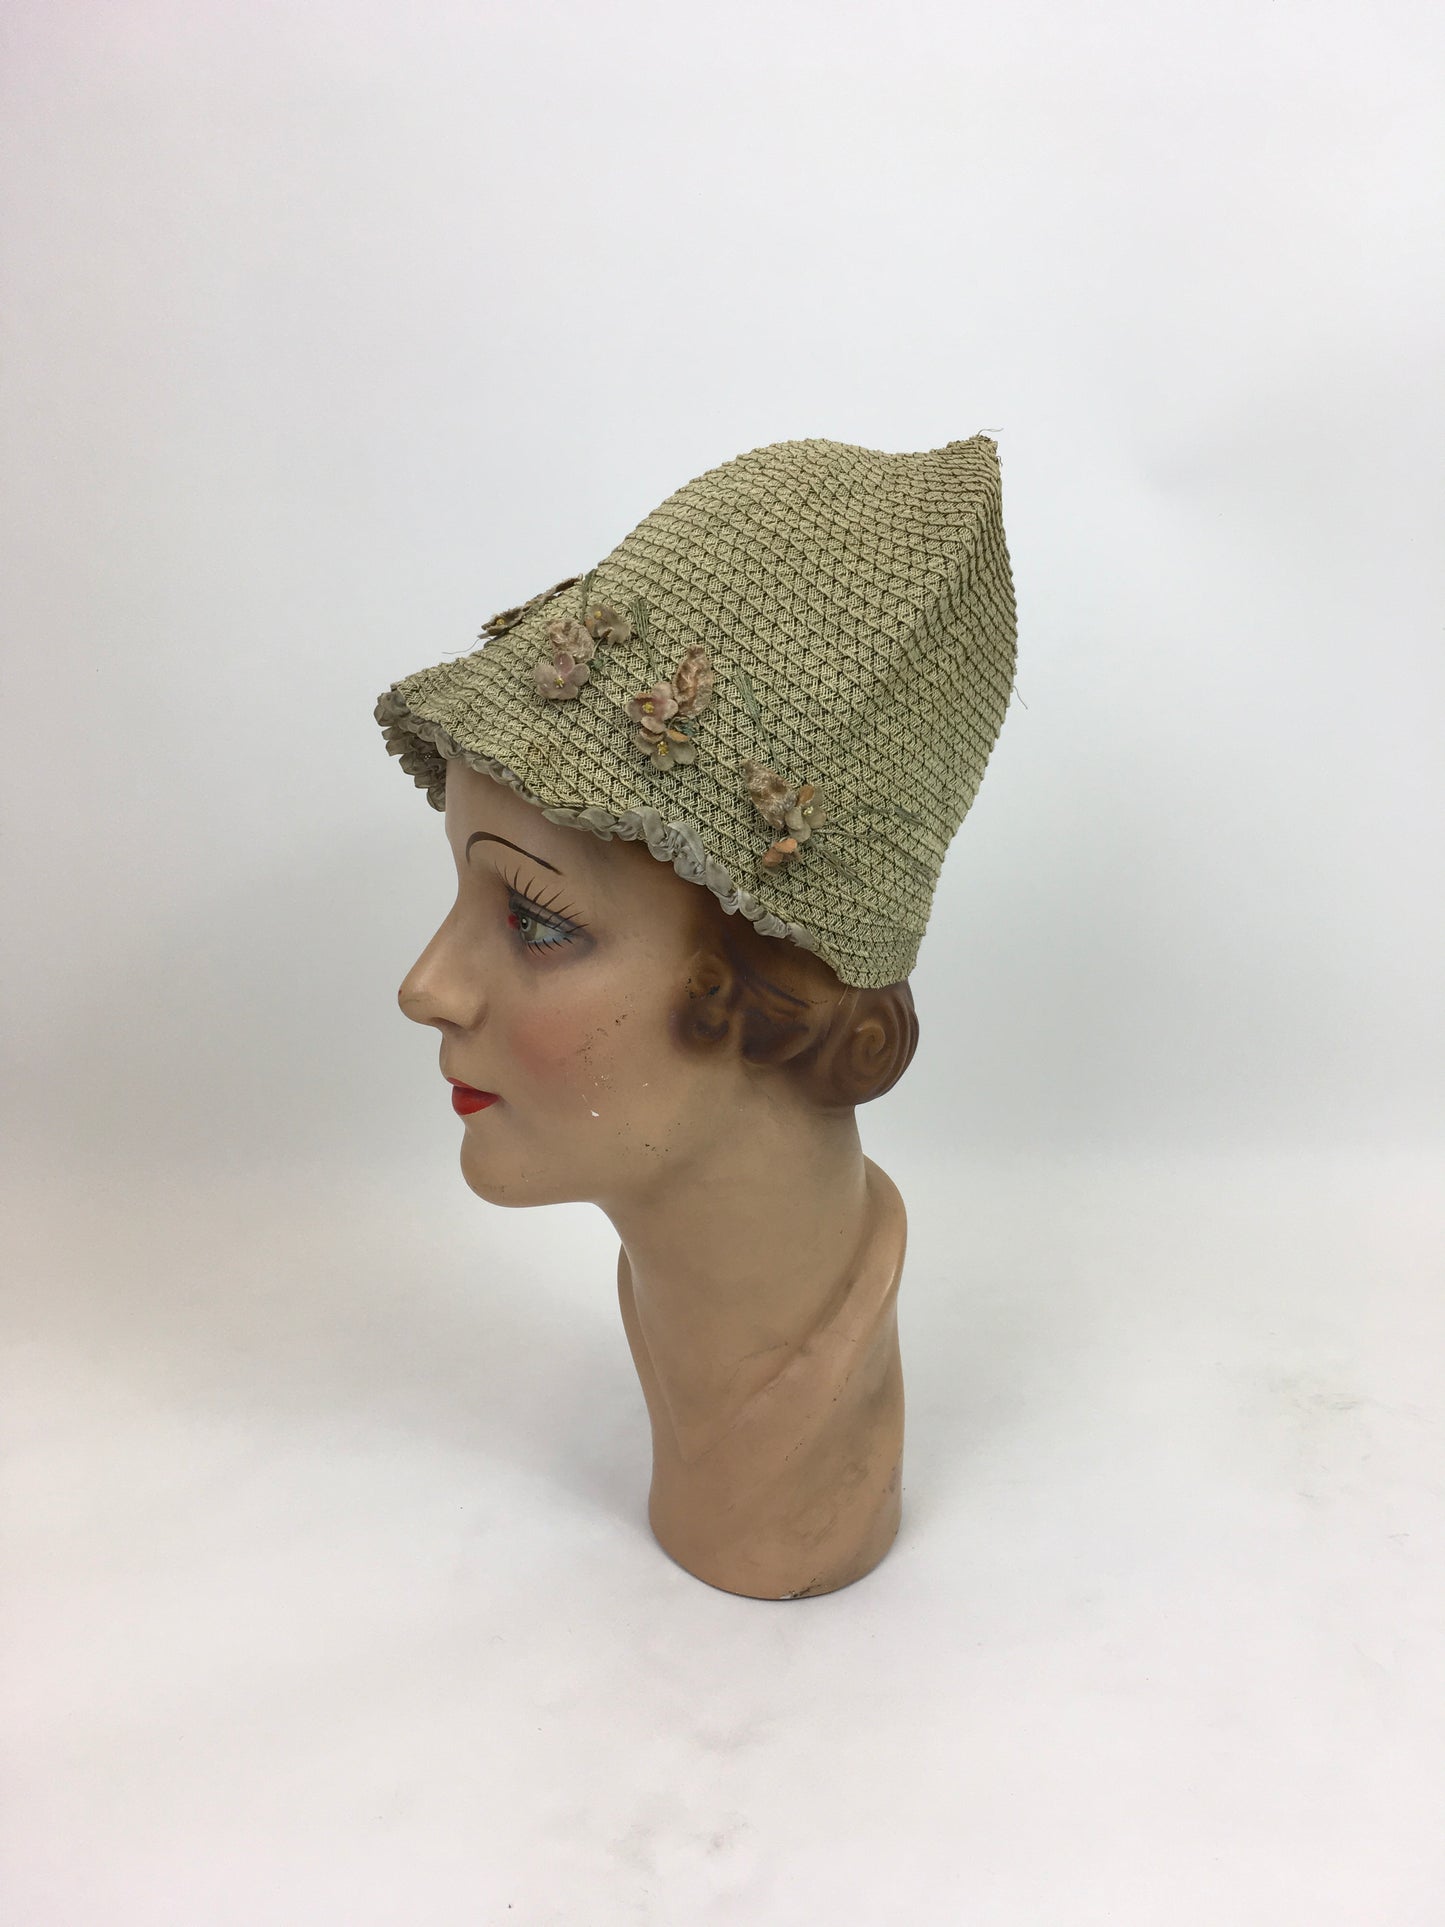 Original 1920's Darling Fabric Cloche Hat by ' Migola Reg'd' - With Dainty Velvet Floral Trims